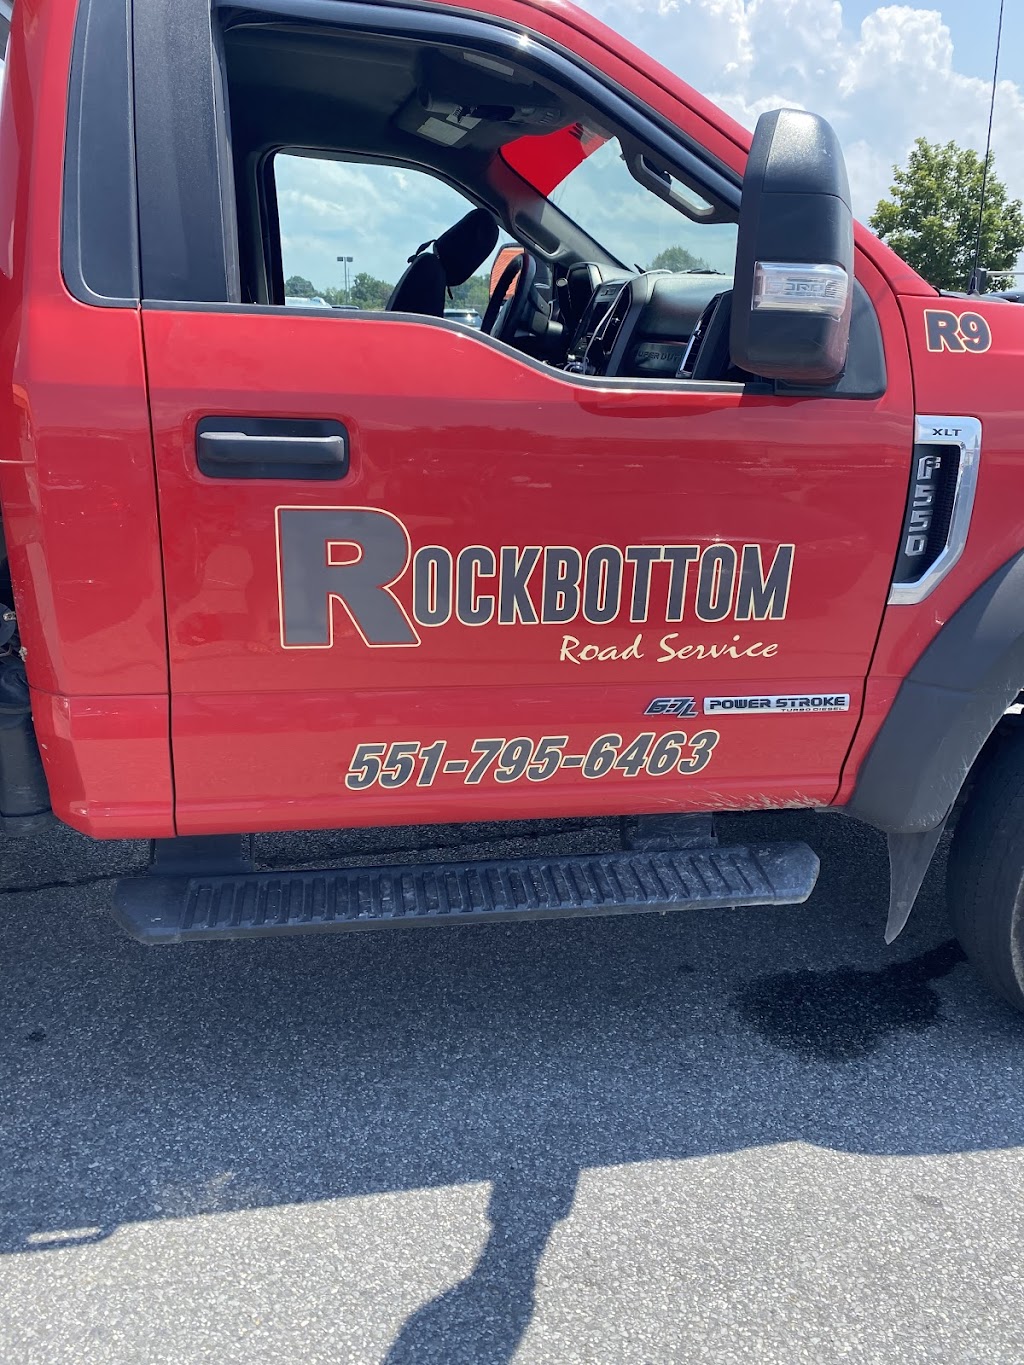 Rockbottom Road Service | 234 Bloomingburg Rd Unit C, Middletown, NY 10940 | Phone: (551) 795-6463